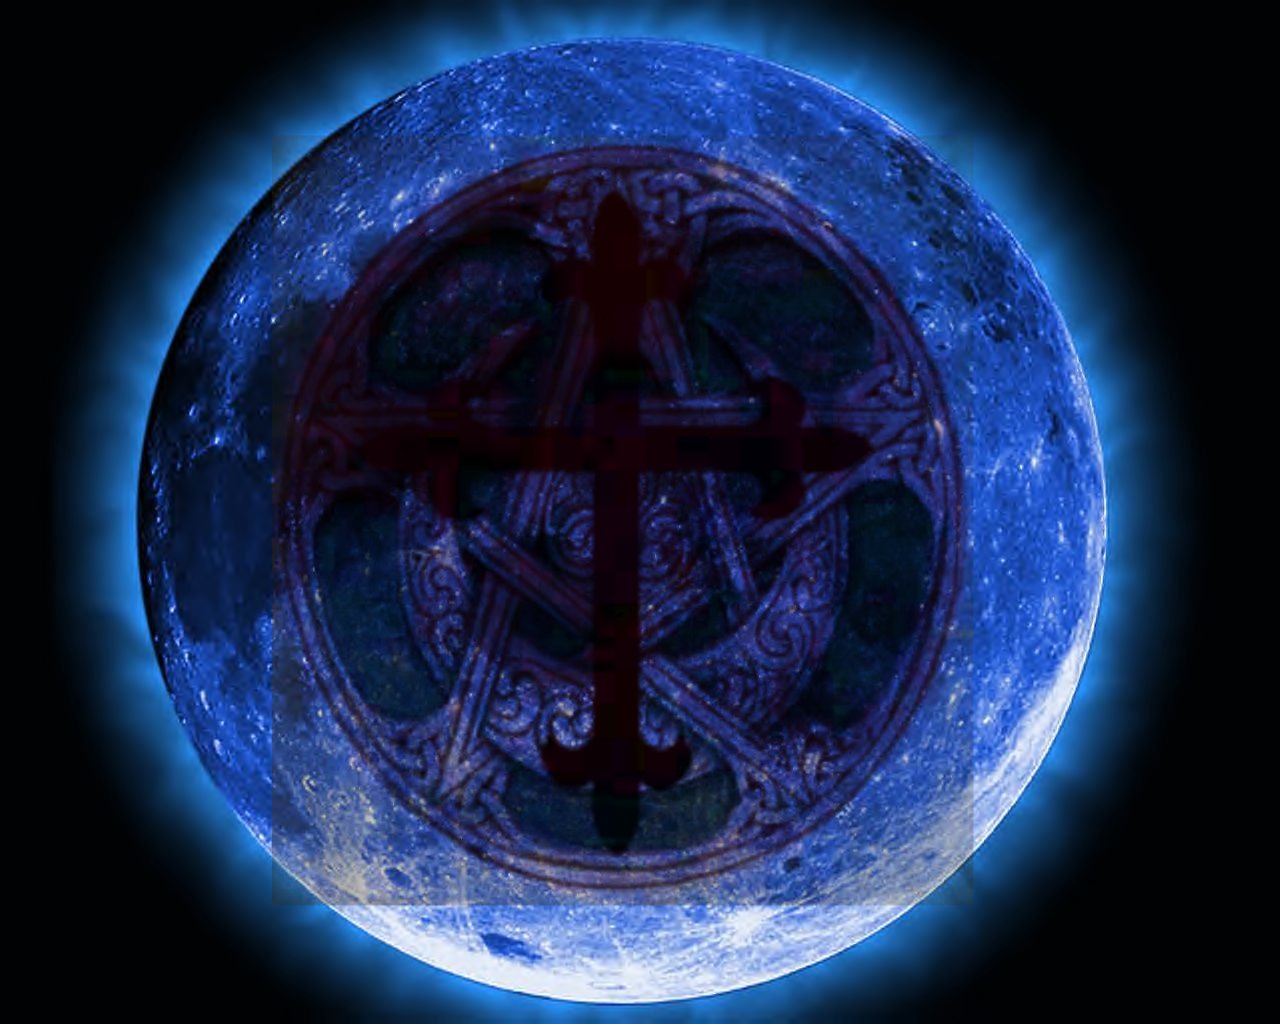 Displaying 17 Images For   Wiccan Moon Wallpaper